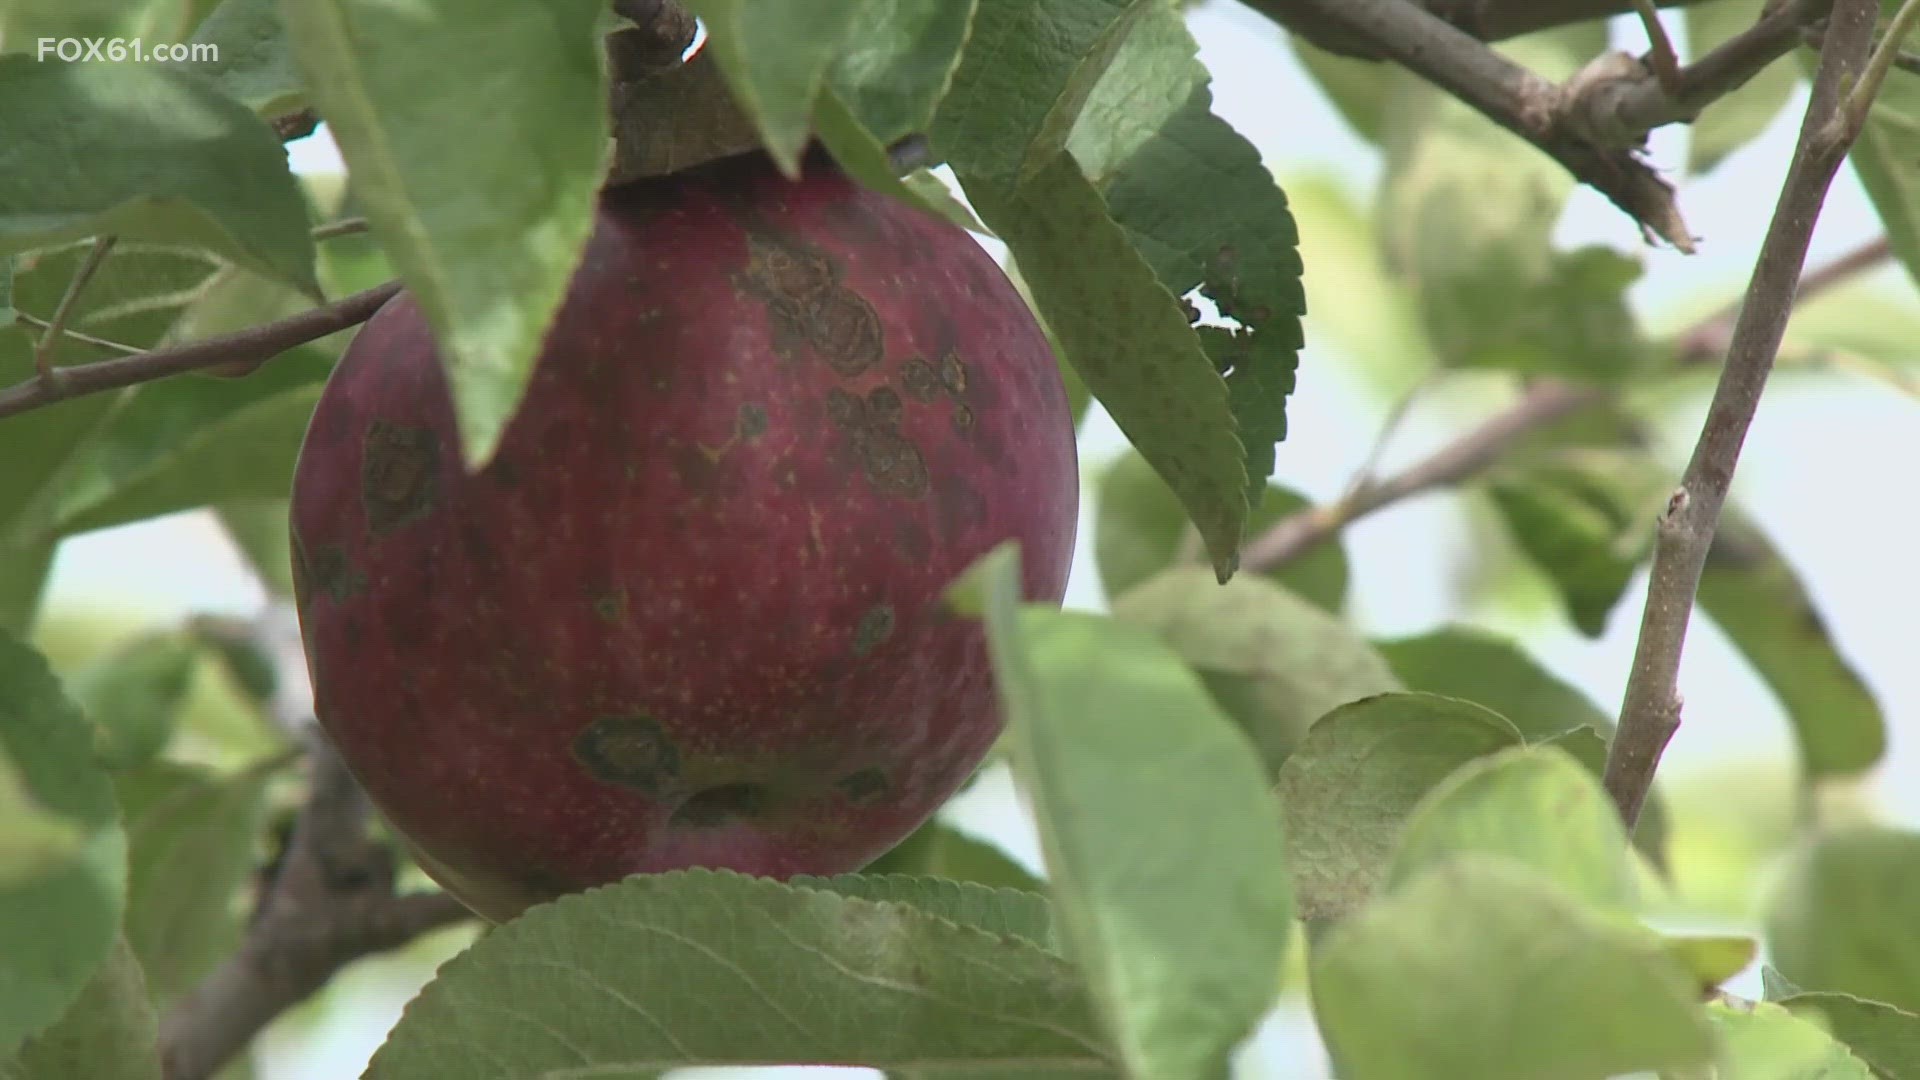 This is the first time Johnny Appleseed's in Ellington has lost crop in the farm's history.